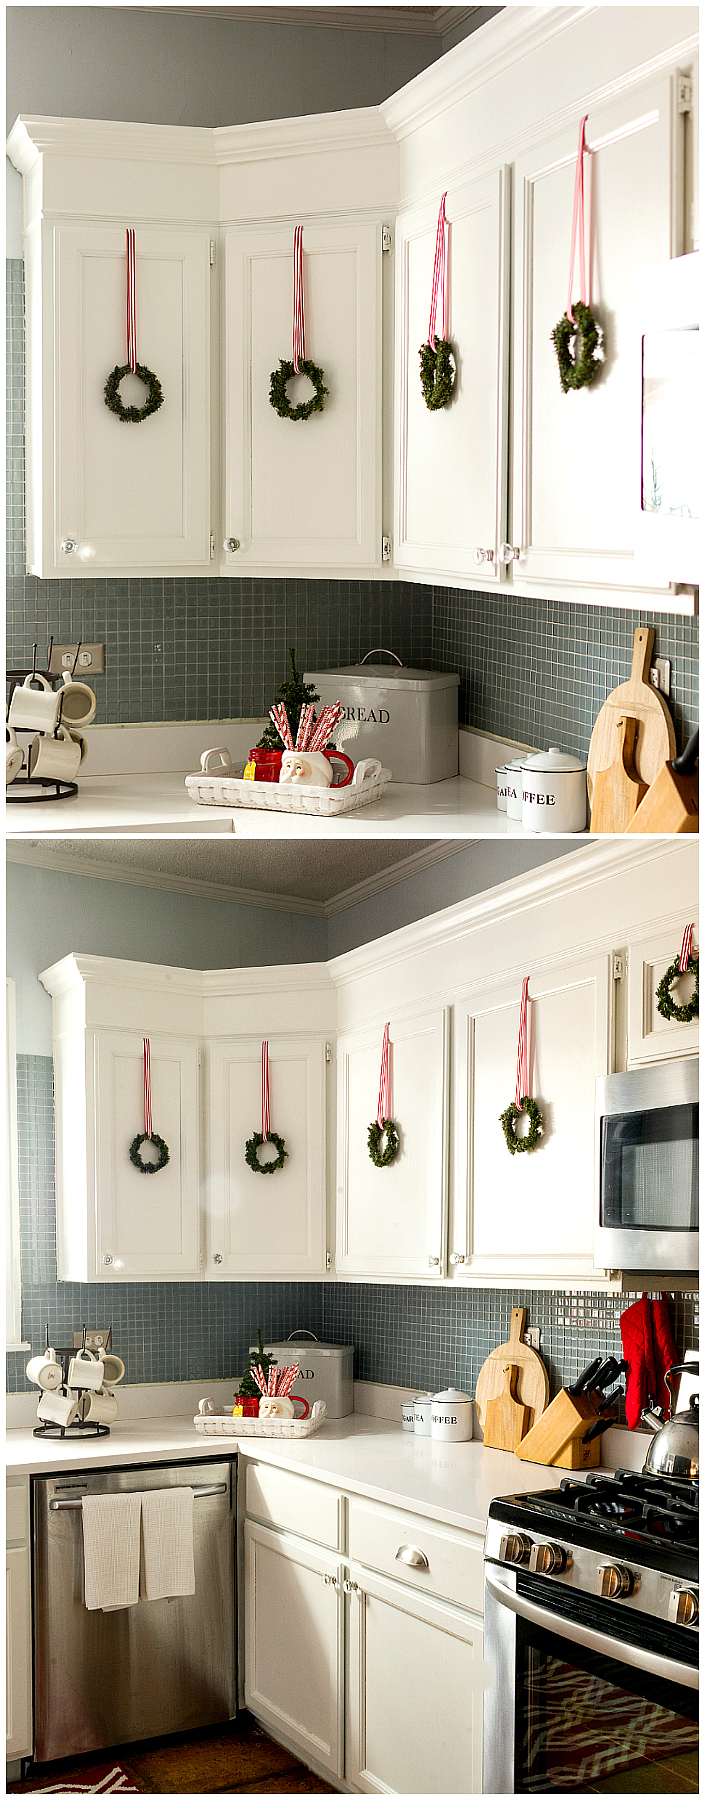 Decorating ideas with wreaths on cabinet doors